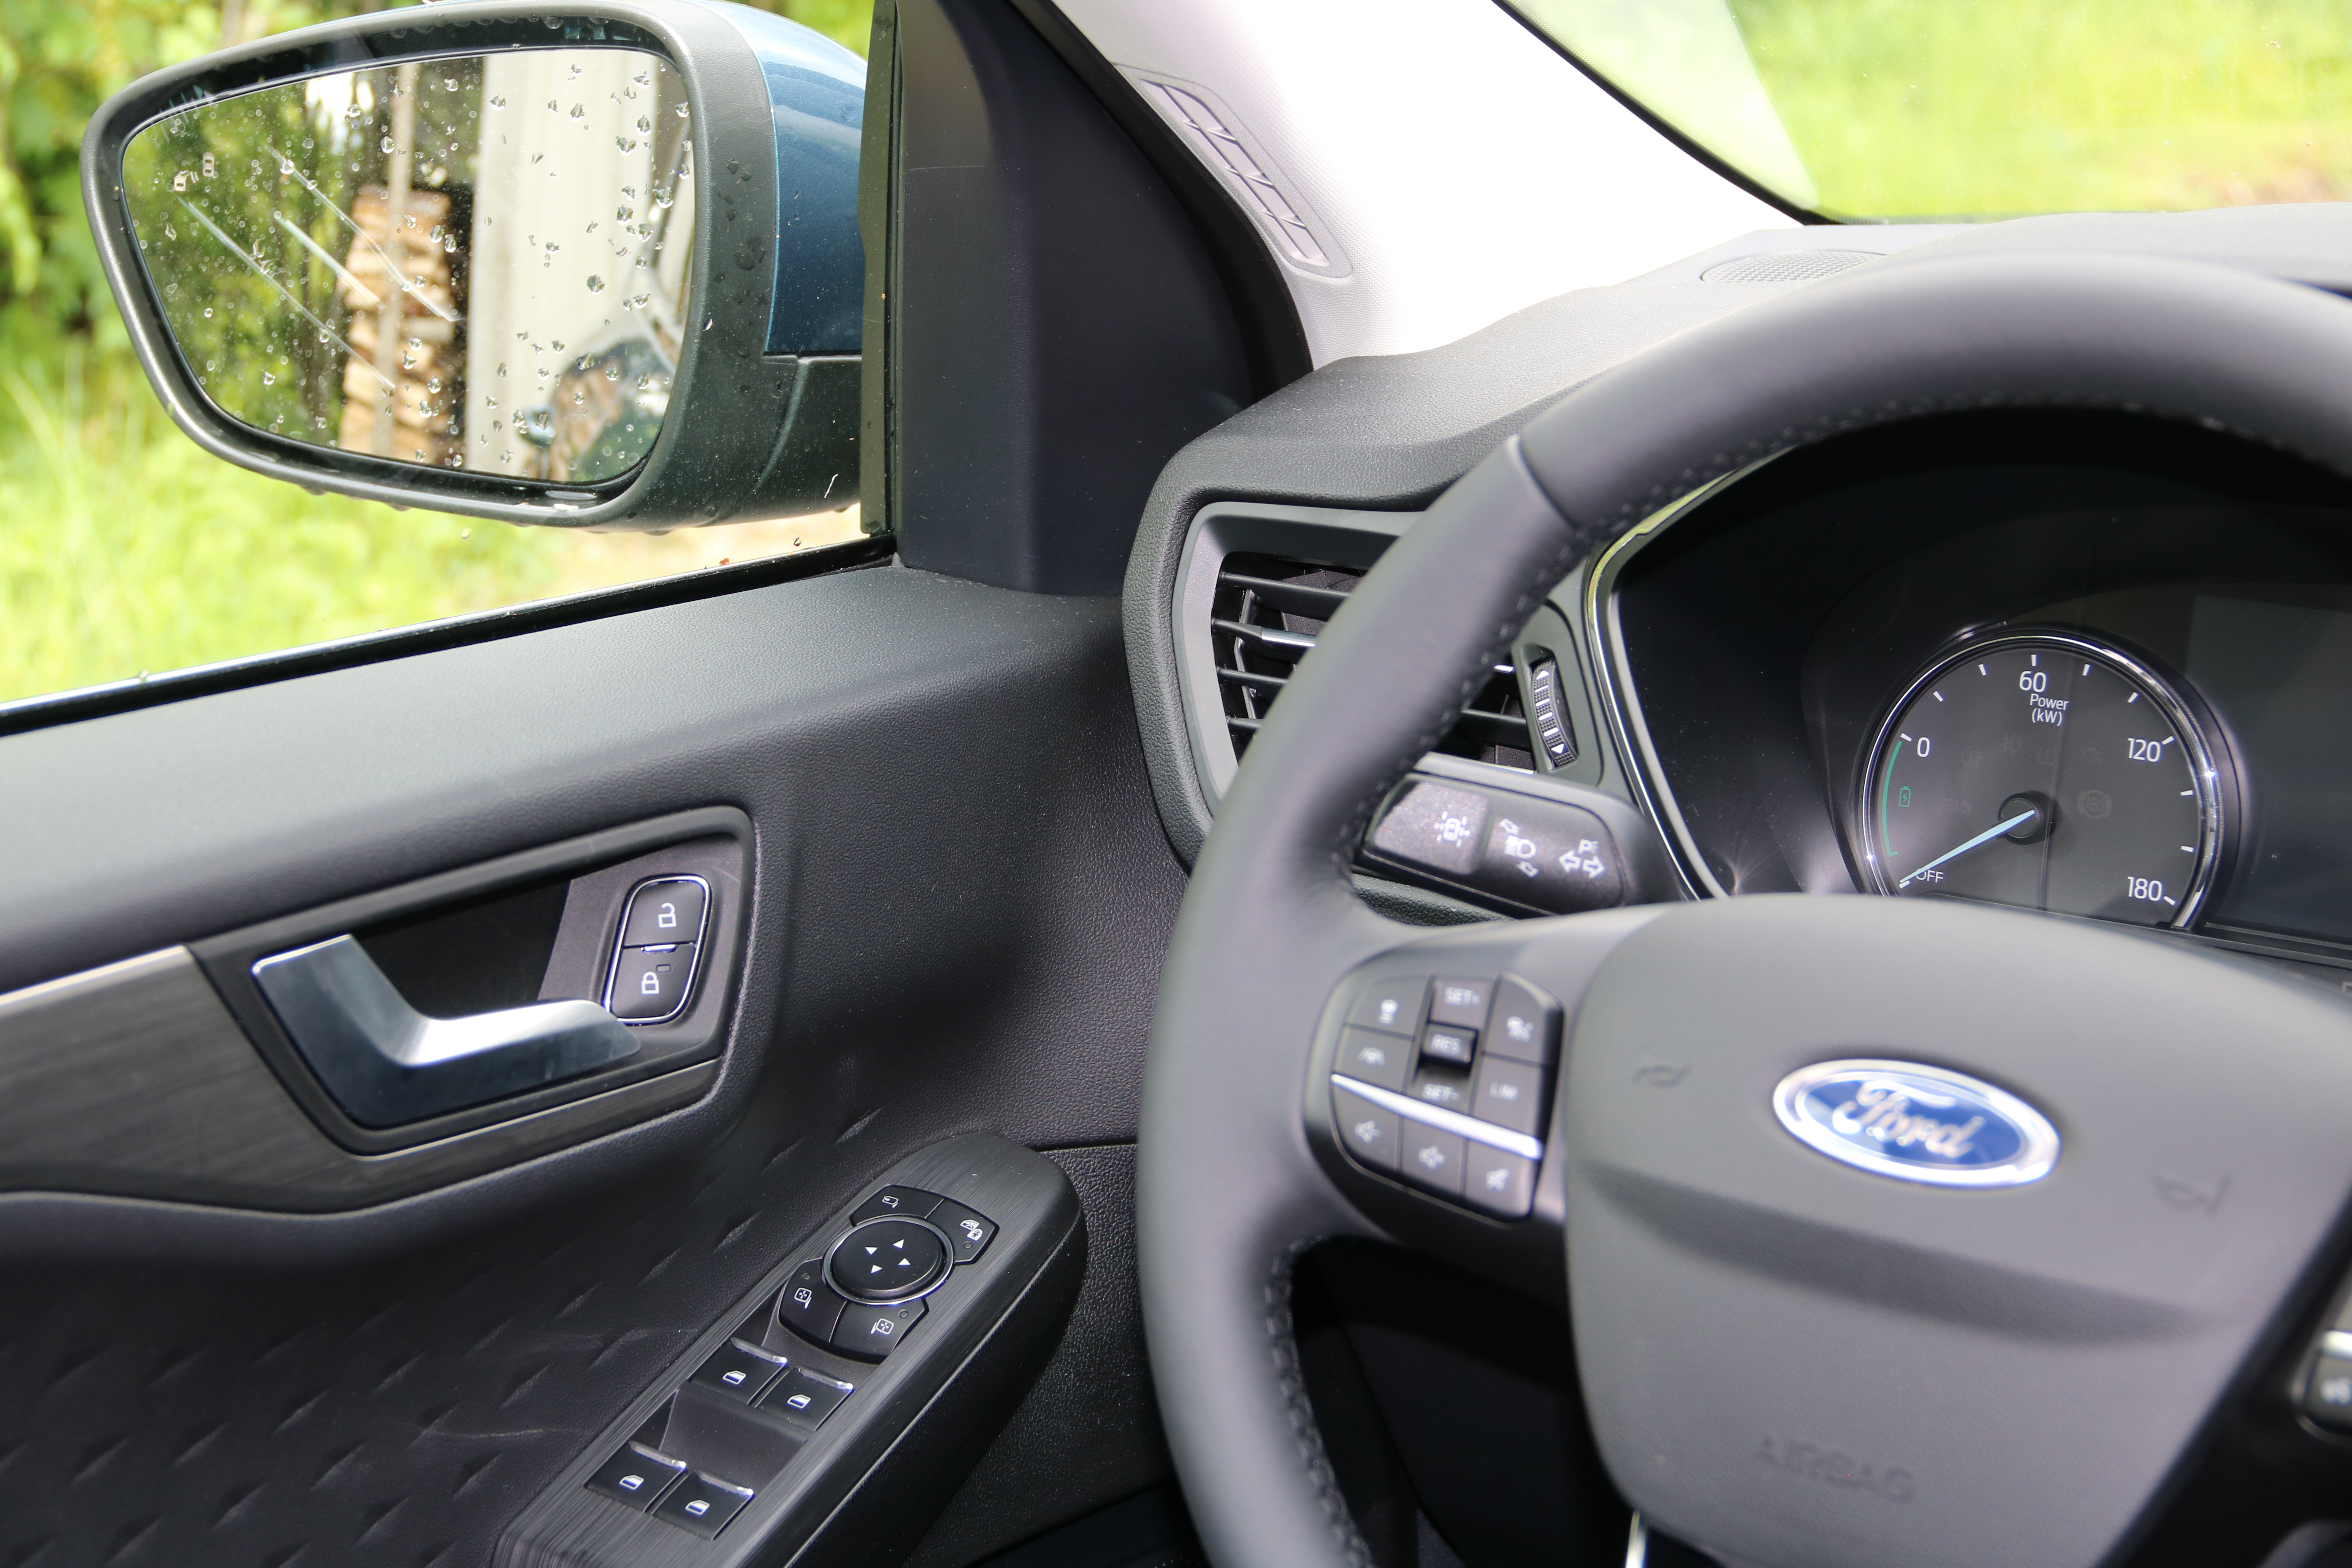 Ford Kuga rear view mirrors and their controls